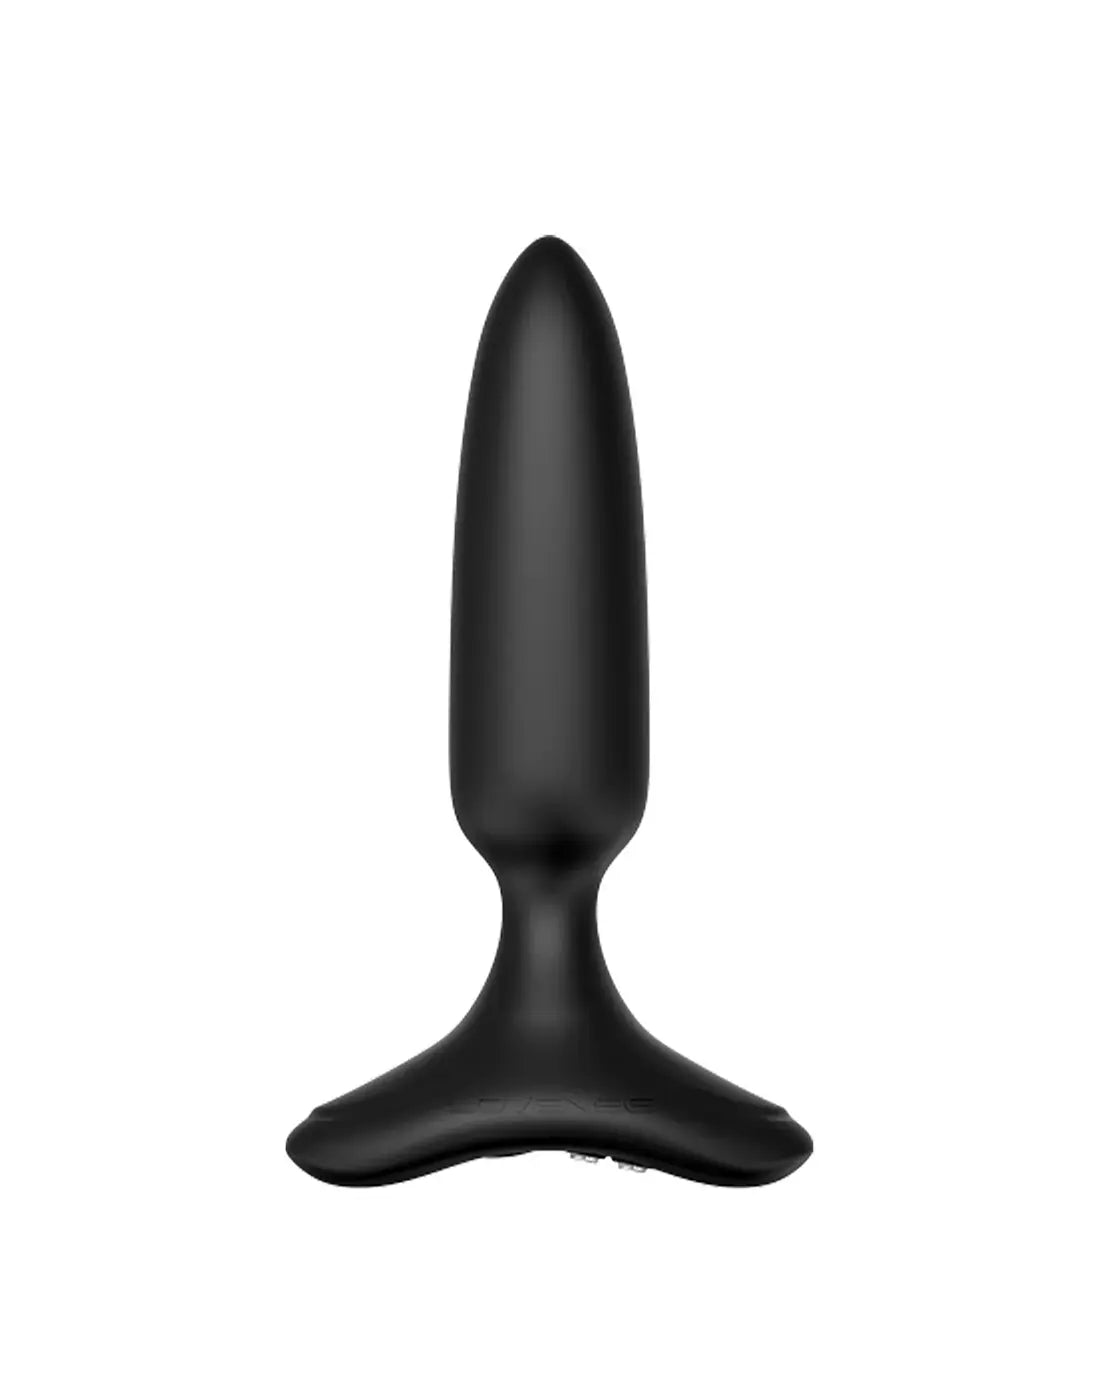 See our Anal Plugs, Butt Plugs and Probes